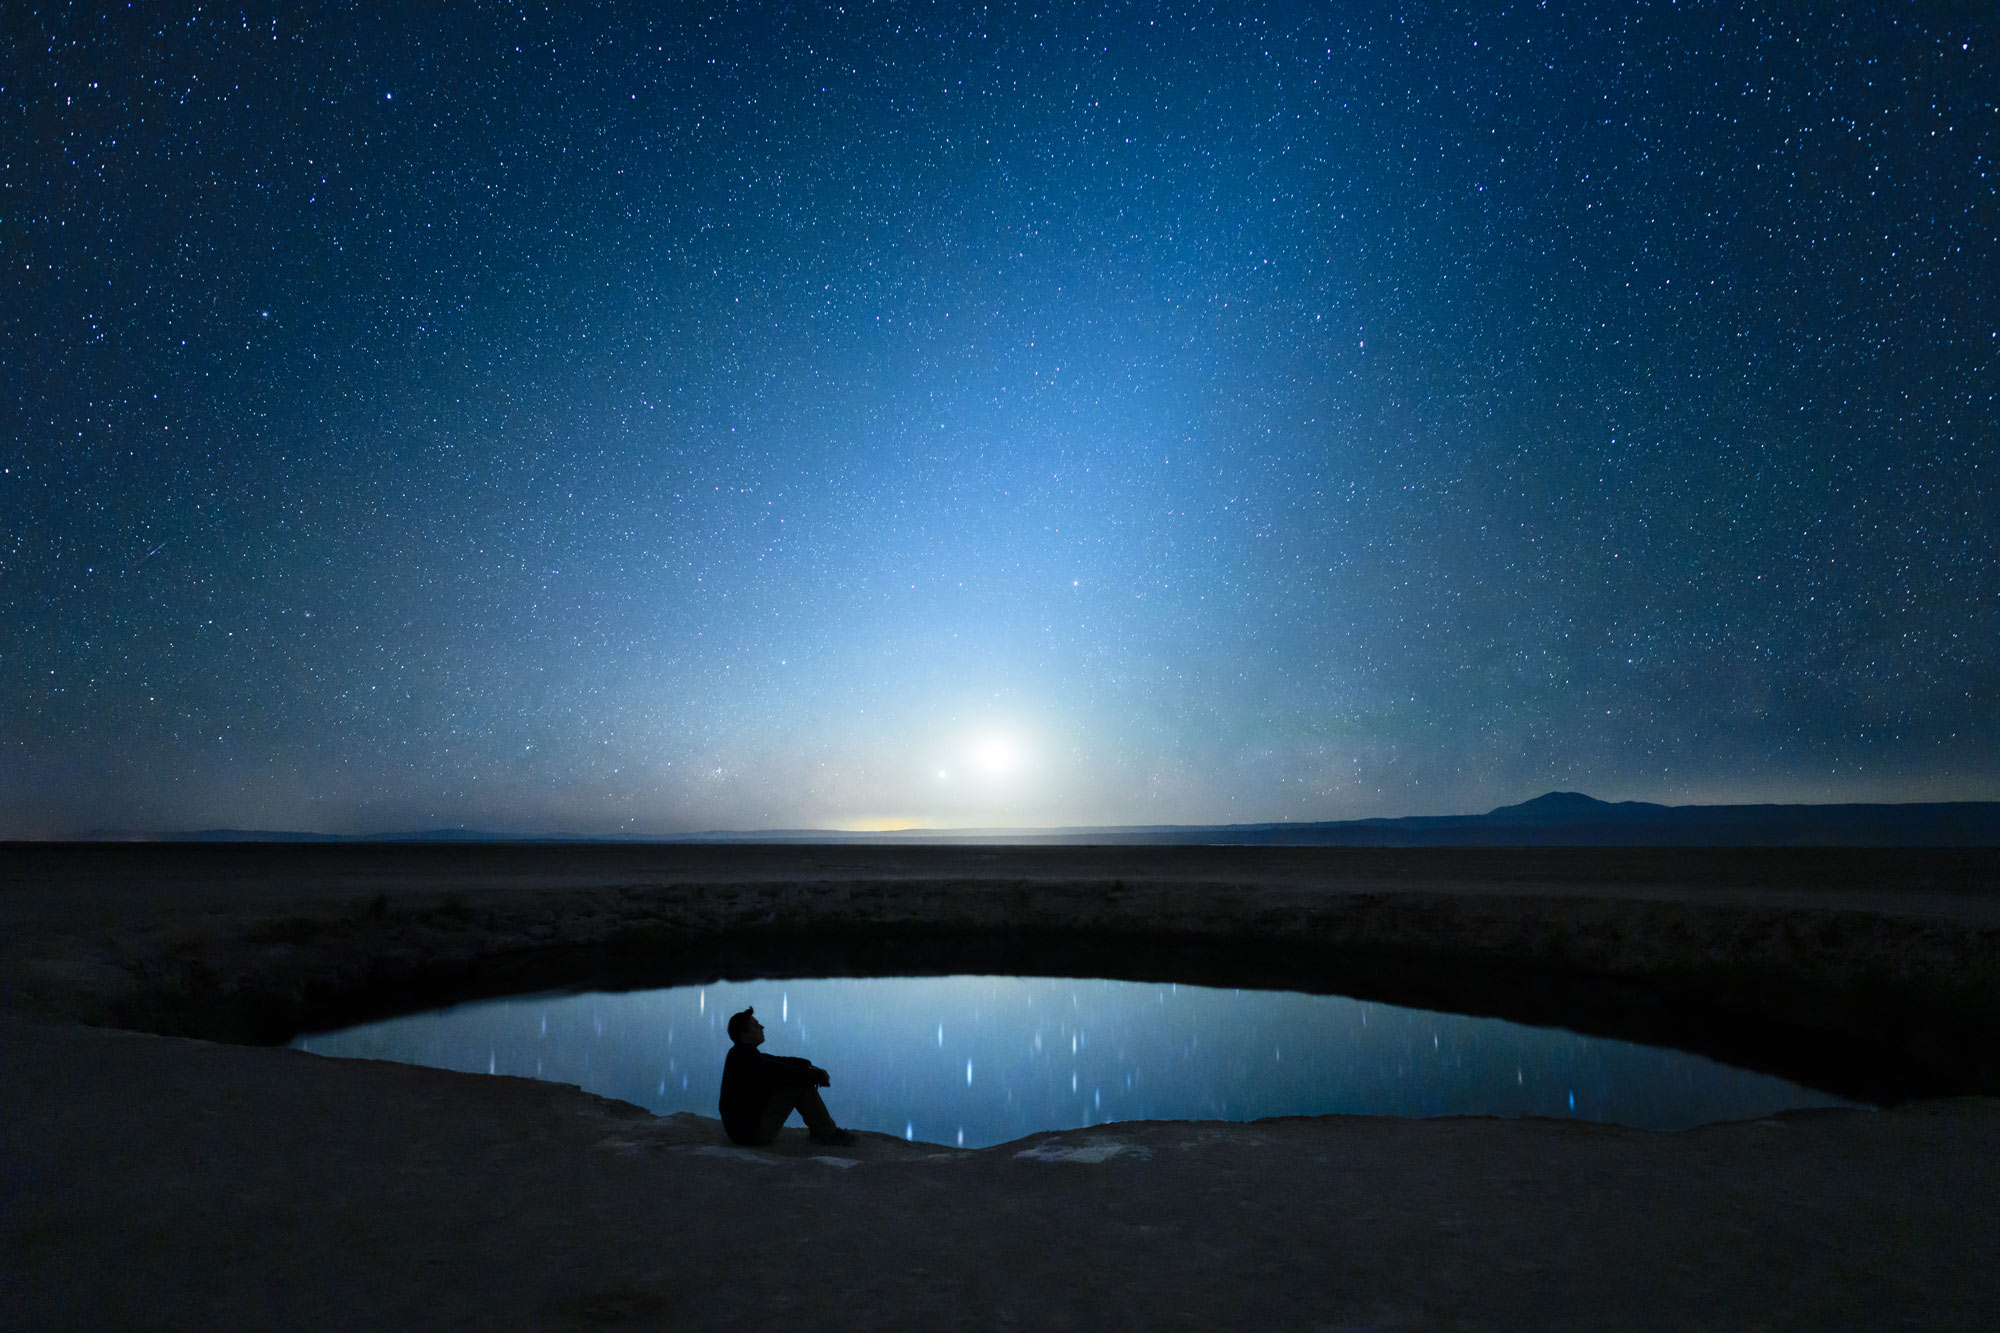 night photo of a starry sky and reflection in a pond, with a figure in silhouette starring at the sky, taken with the NIKKOR Z 20mm f/1.8 S